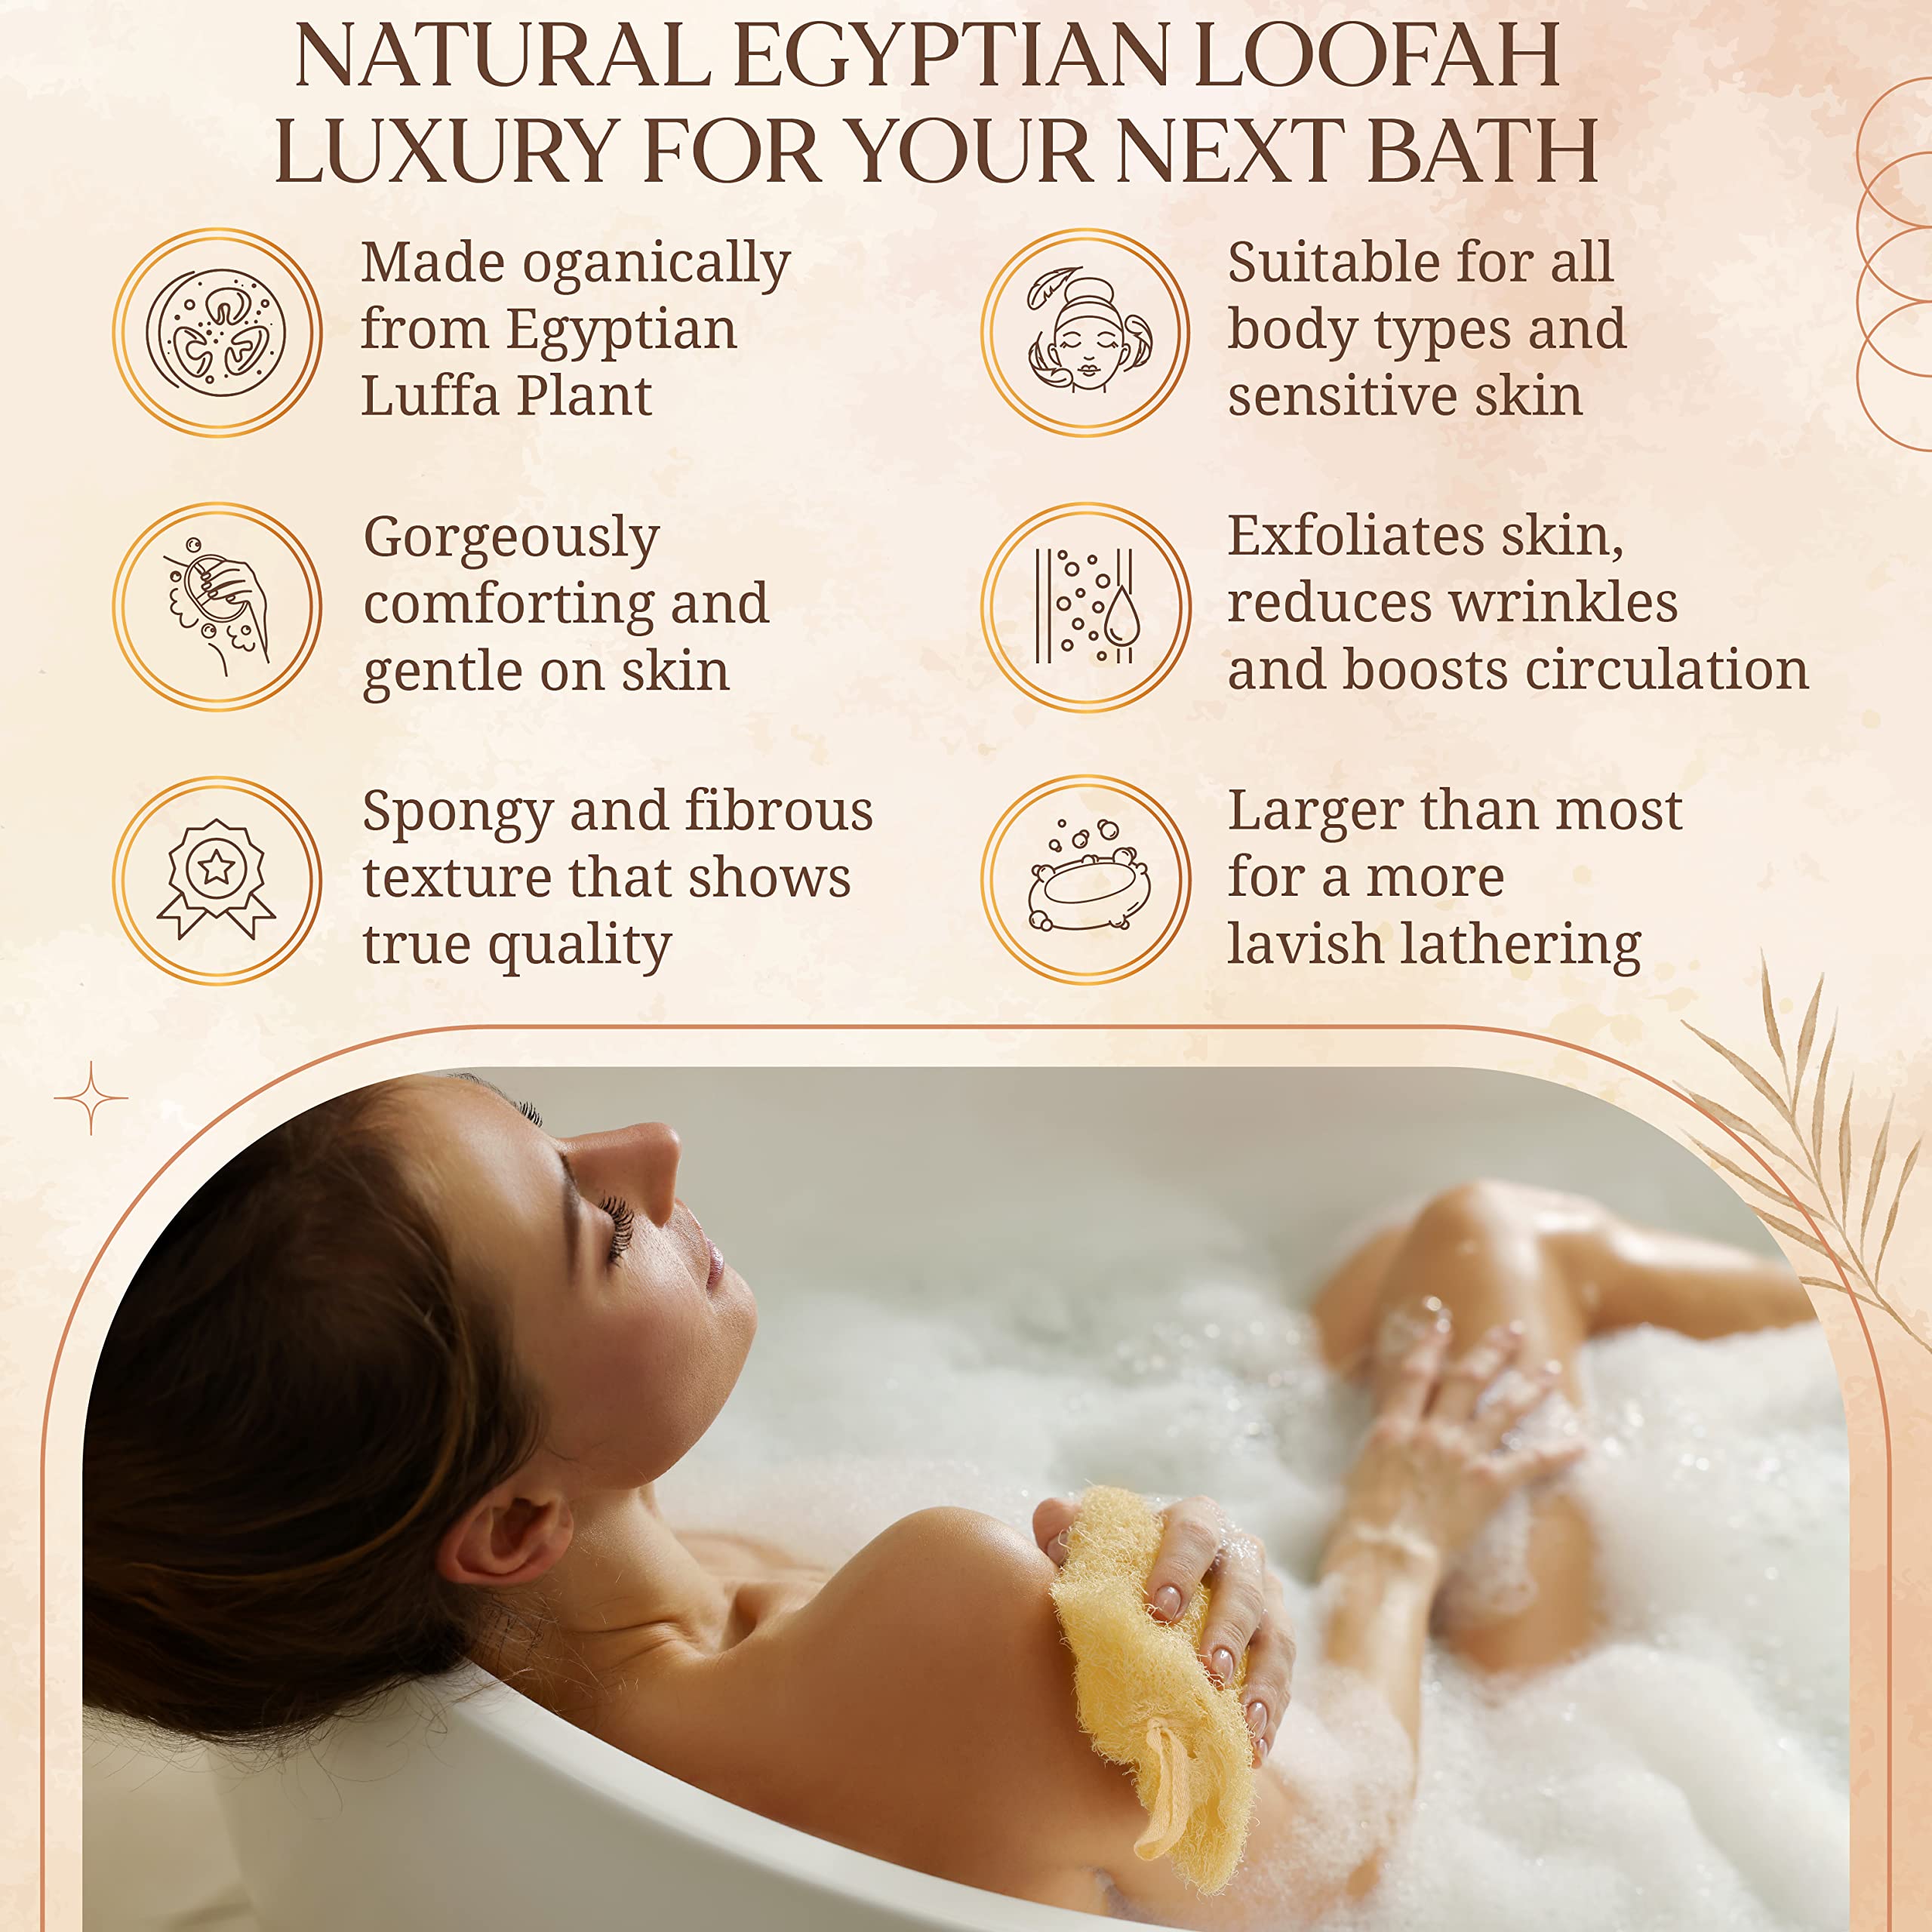 Egyptian Natural Loofah Sponge Exfoliating Body Scrubber - Our Bath Loofahs Provide a Refreshingly Deep Clean to Your Face & Body - These Luffa Sponges Are Skin-Friendly & Vegan - 6 x 6 Inches, 3 Pack